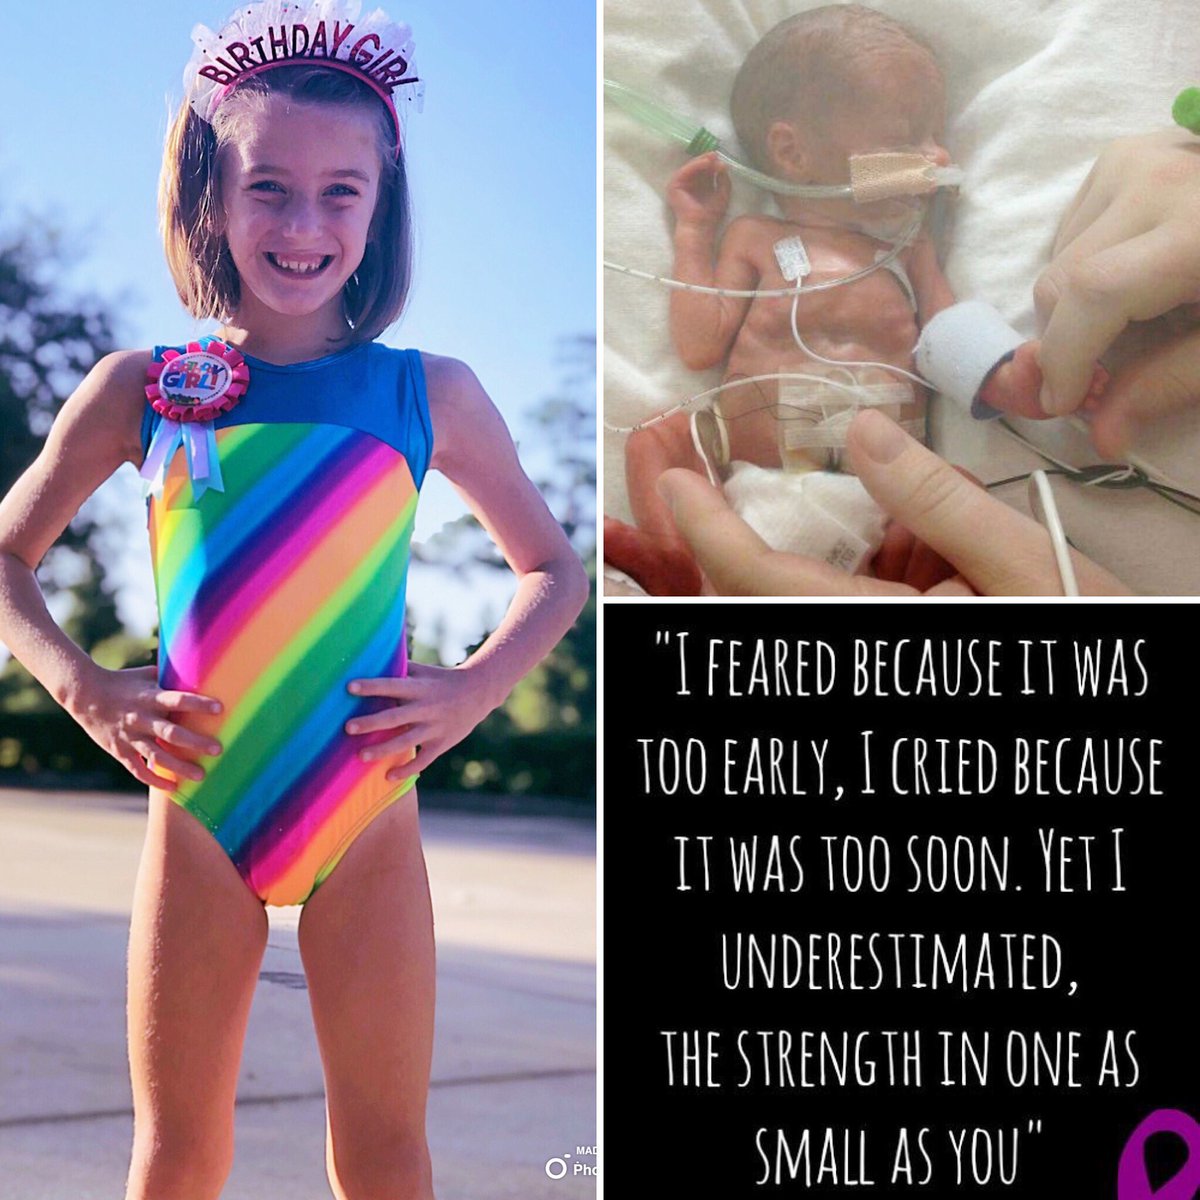 From glass, wires, and machines in the NICU to beans, cartwheels, and bridges in Gymnastics; this miracle continues to defy all odds.   Today she is proudly rocking turning 7. Happy Birthday, baby girl! 💗#nicustrong #macropreemie #hellpssurvivors #believe #ourjourney #miracles